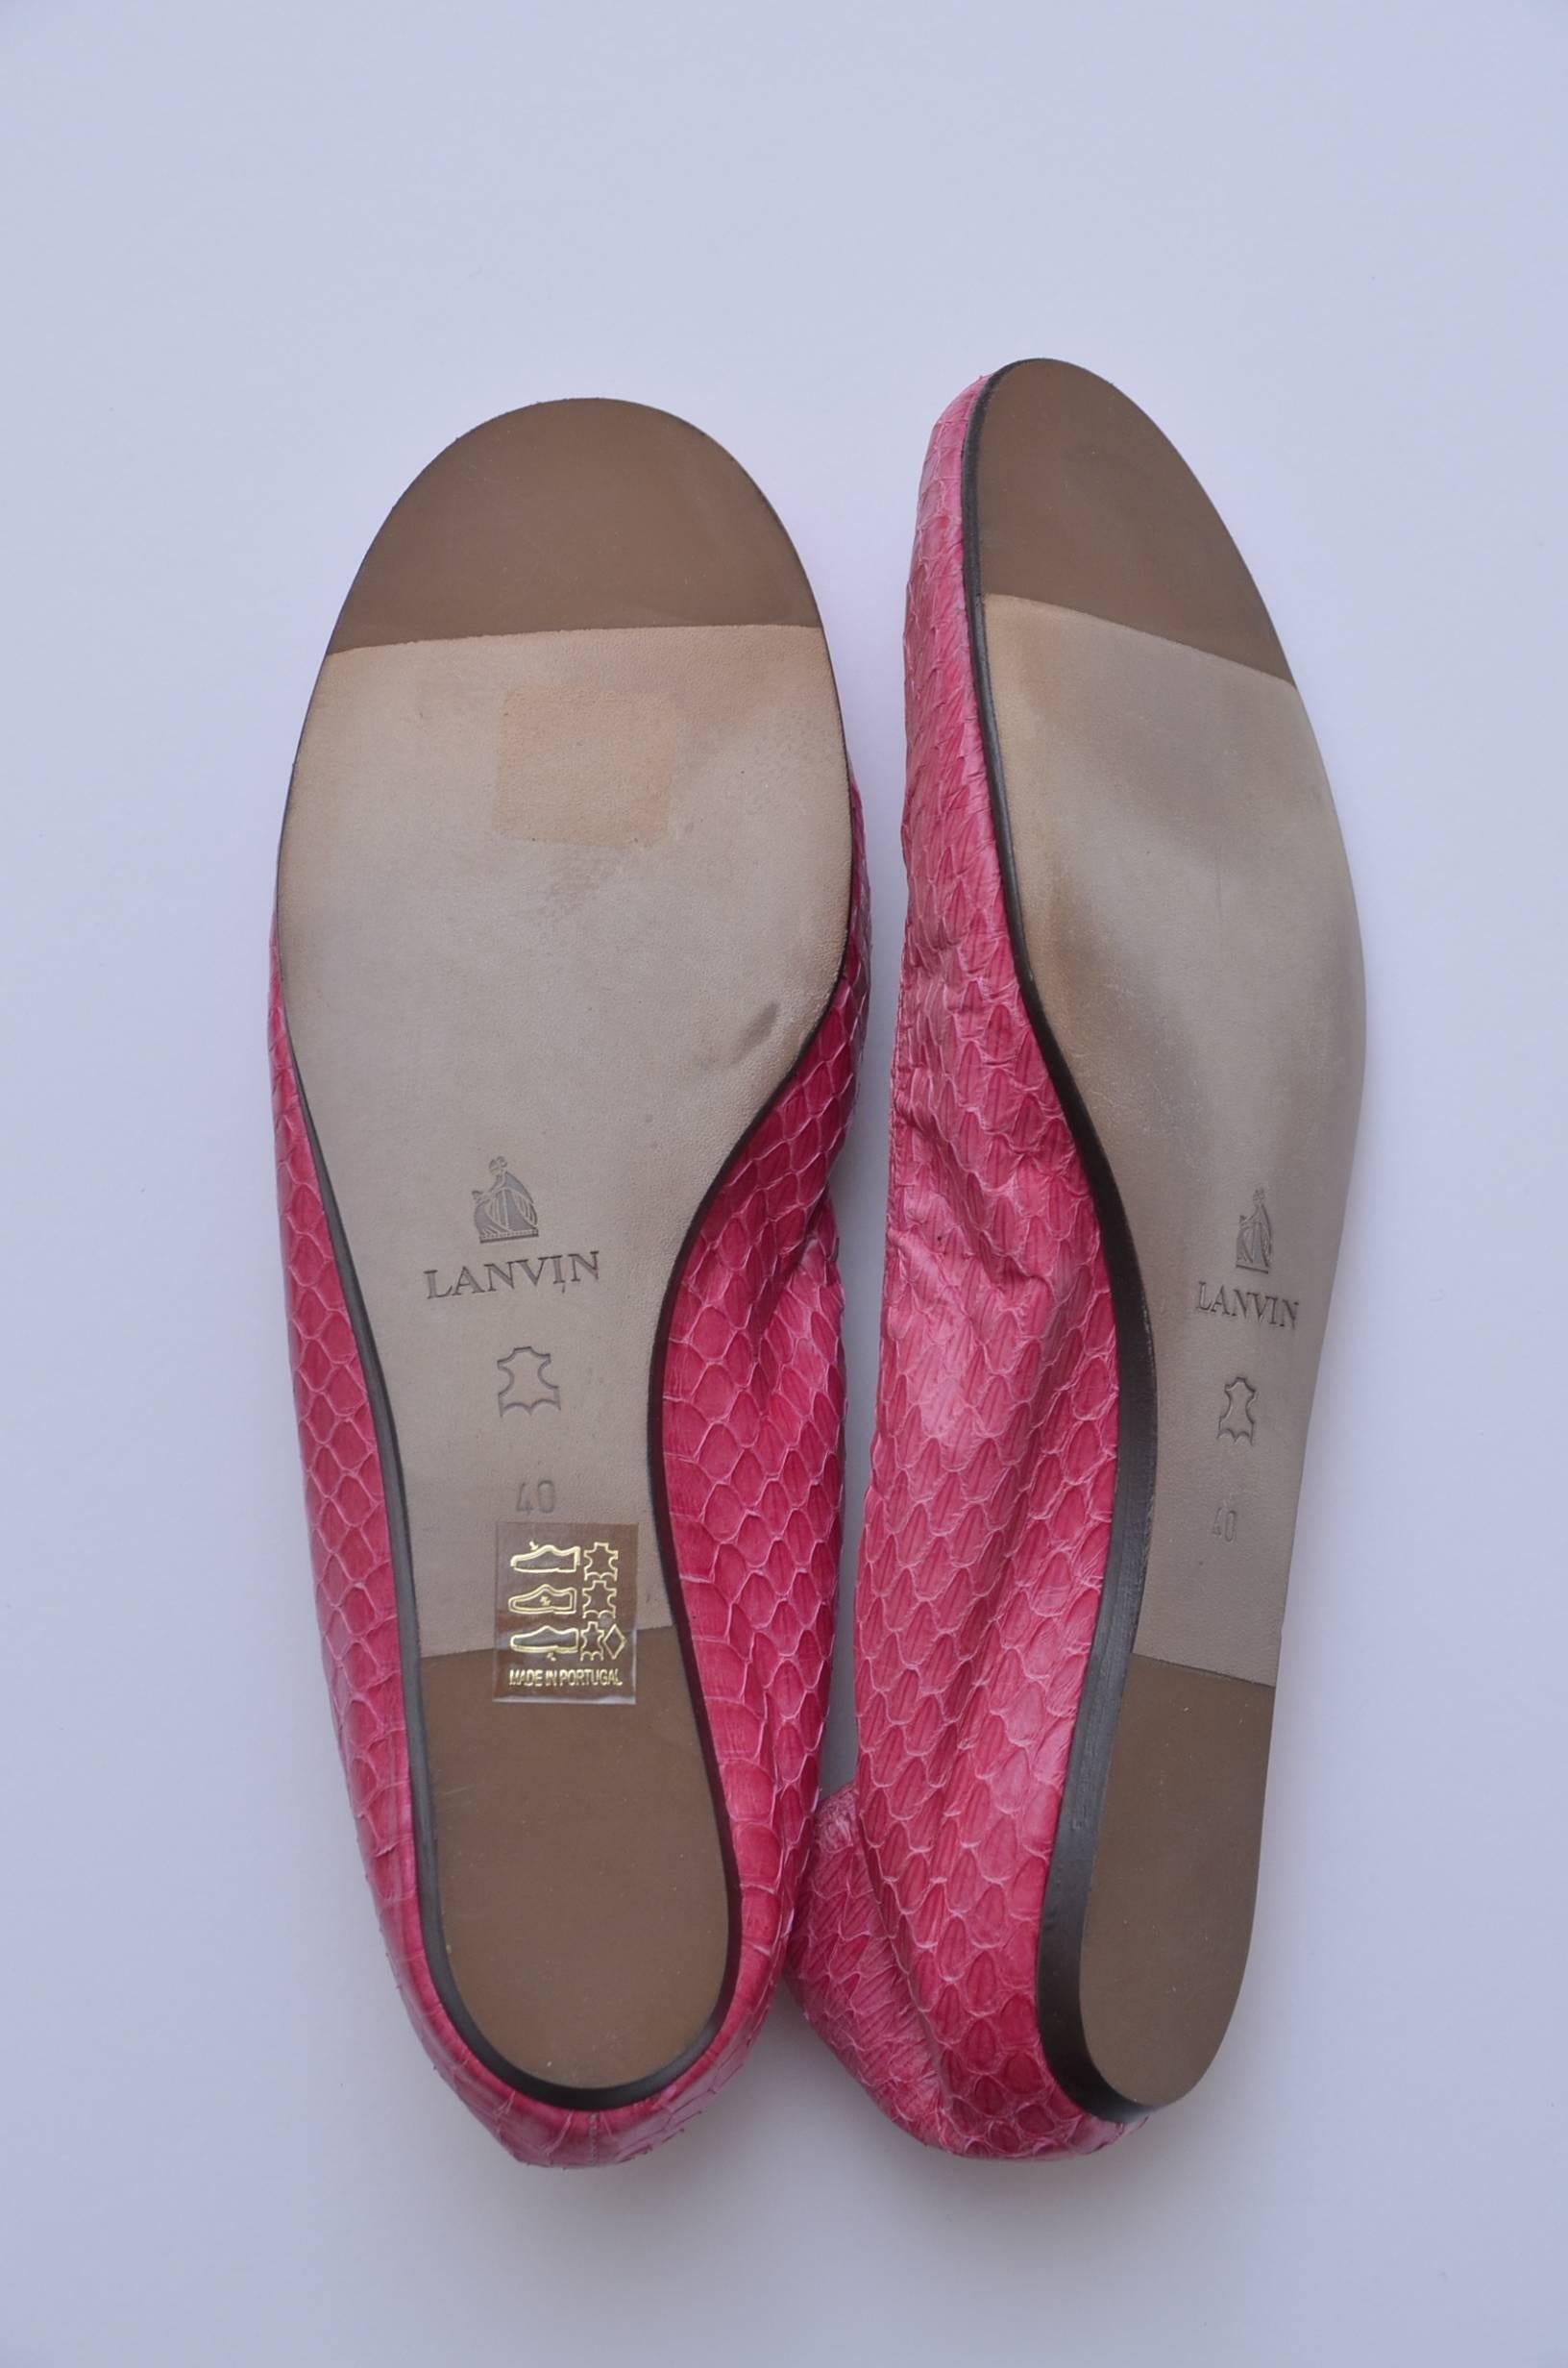 Lanvin new flats.
Snakeskin pink color.
They run small.Bottom outside measure about 10